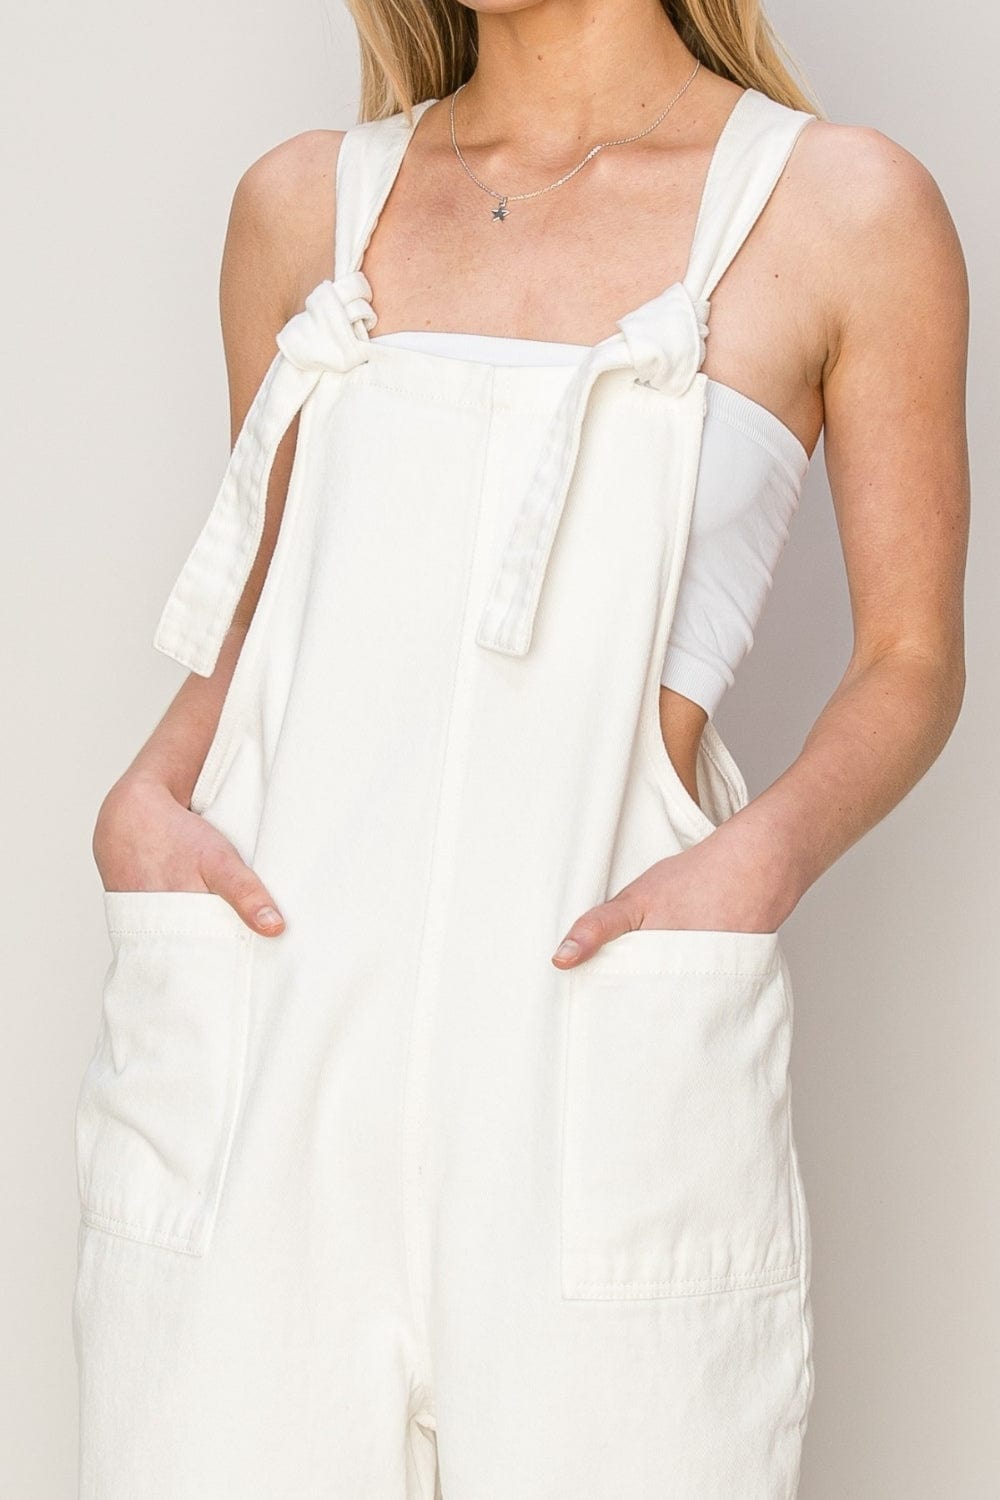 The802Gypsy rompers and jumpsuits ❤️GYPSY-HYFVE-Women's Washed Twill White Summer Romper Overalls